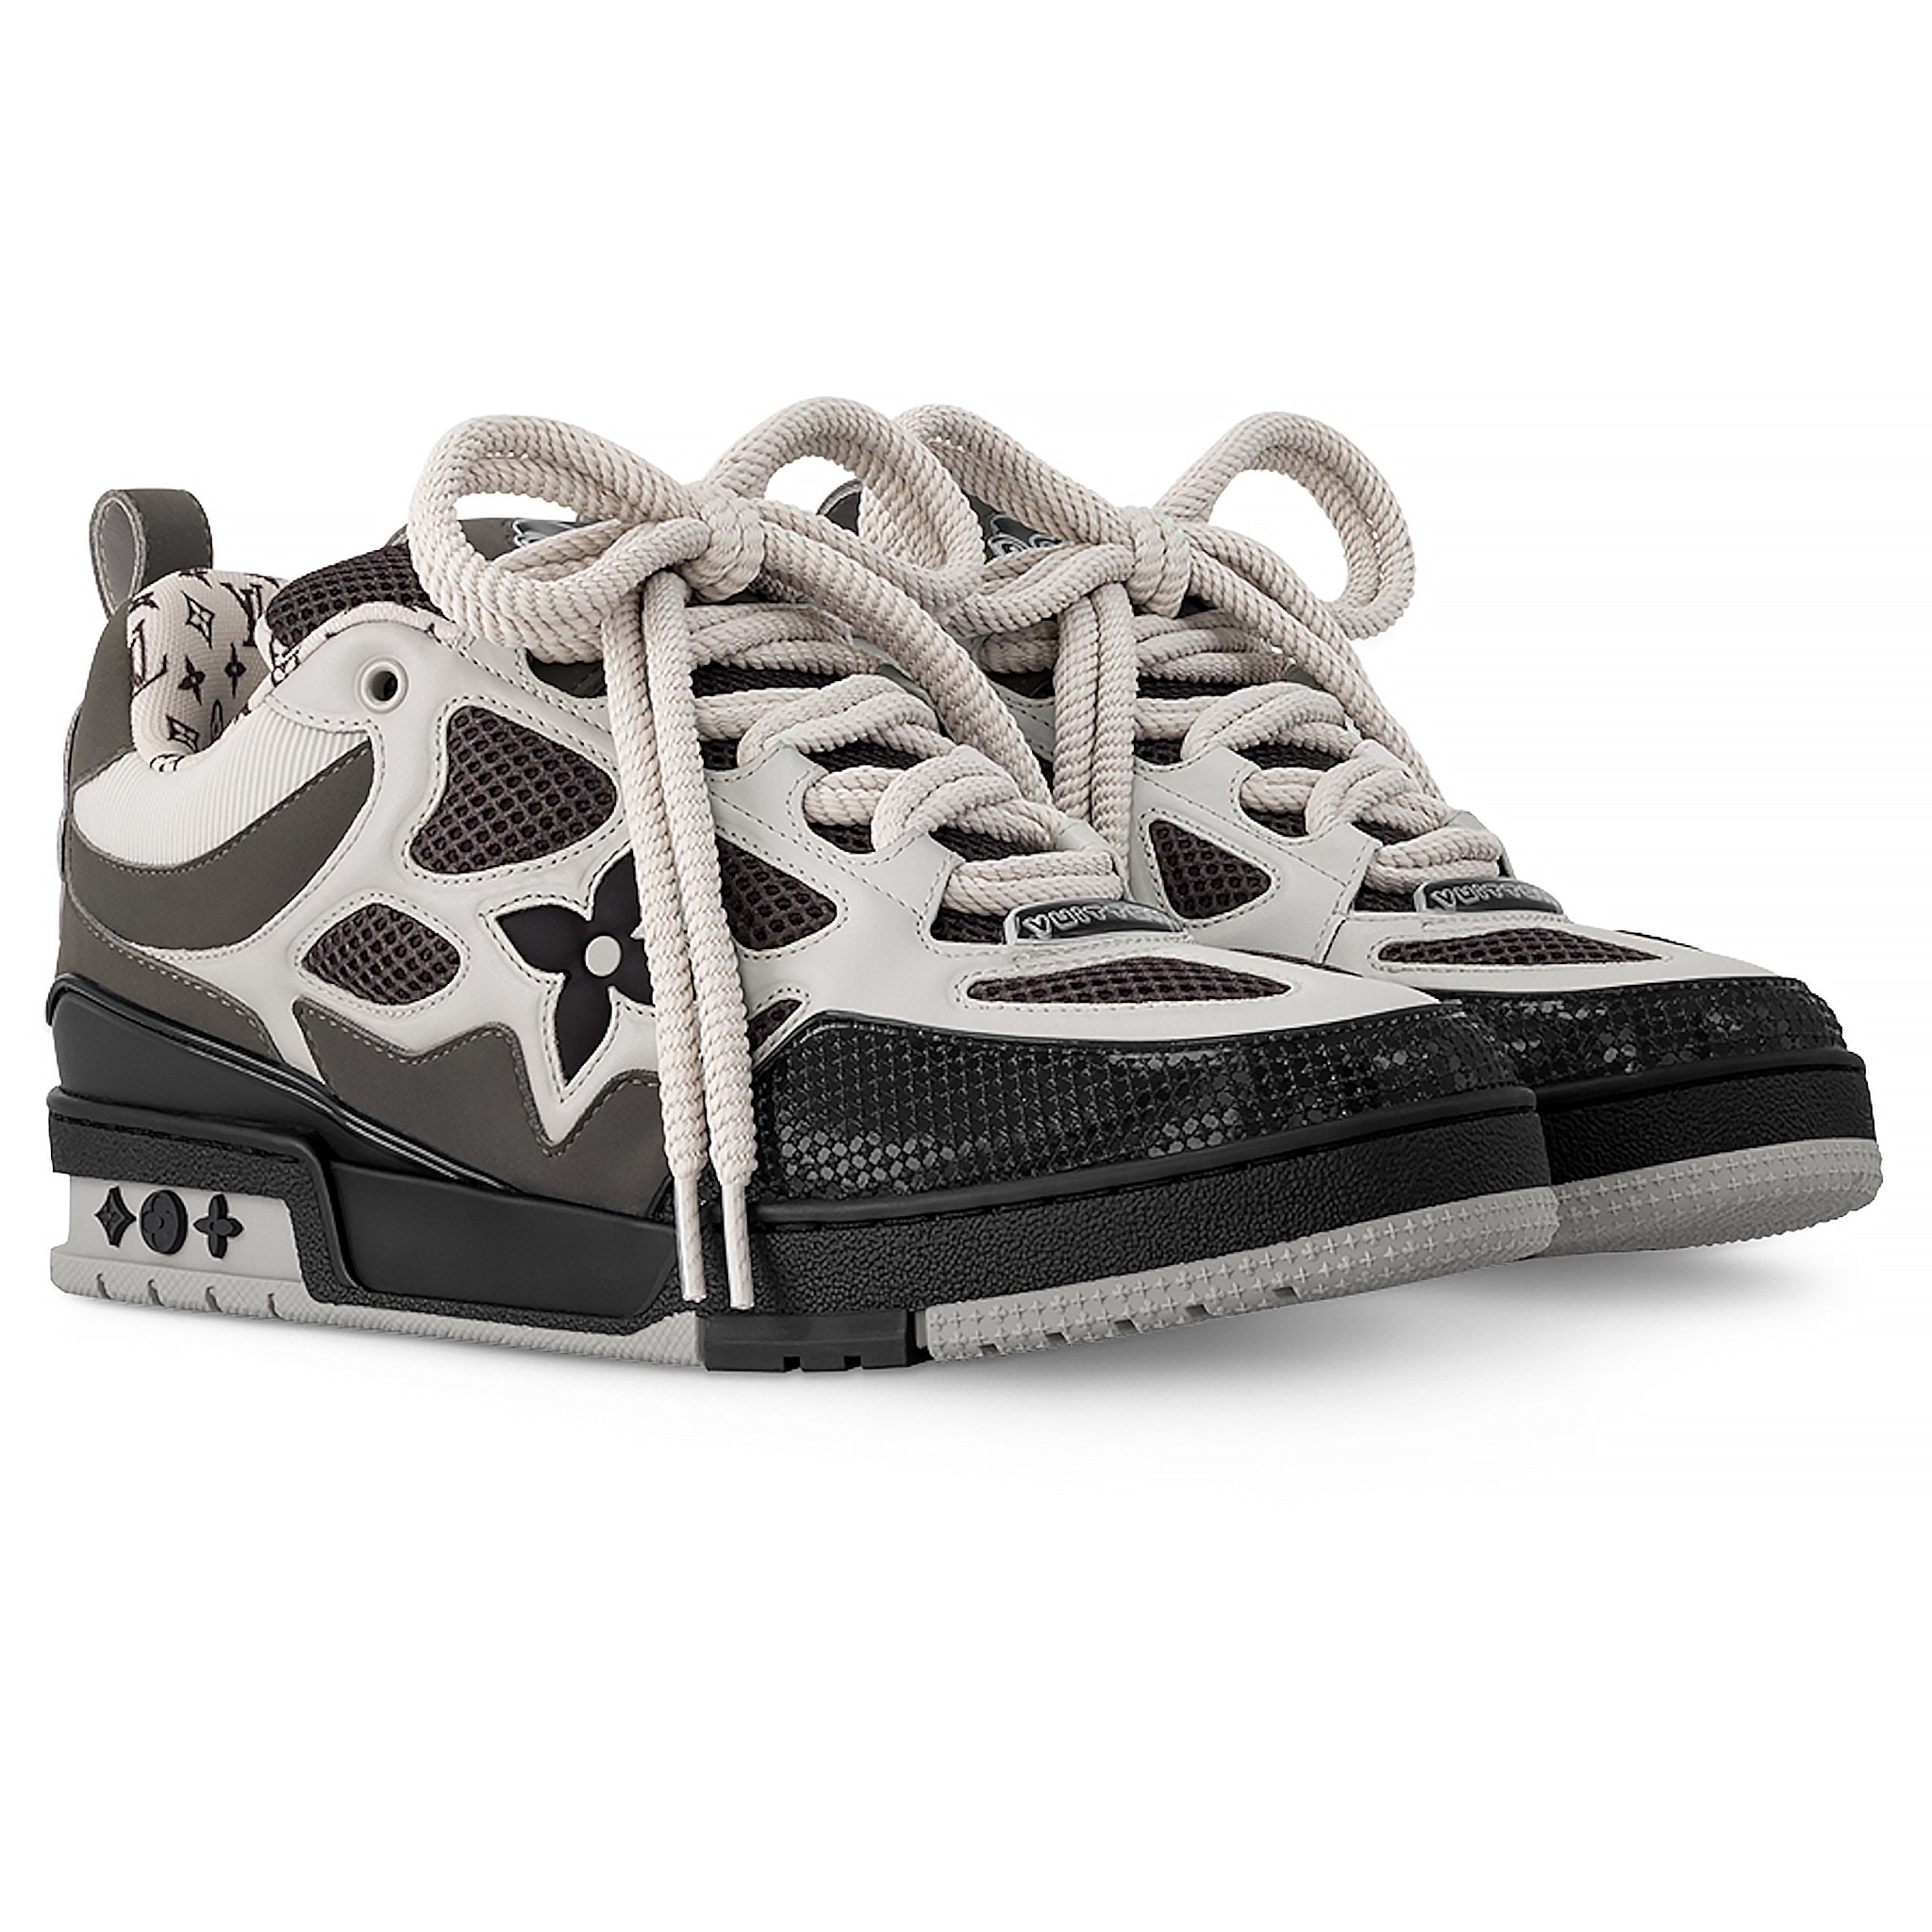 Front side view of Louis Vuitton LV Skate Monogram Trainer Grey Sneaker